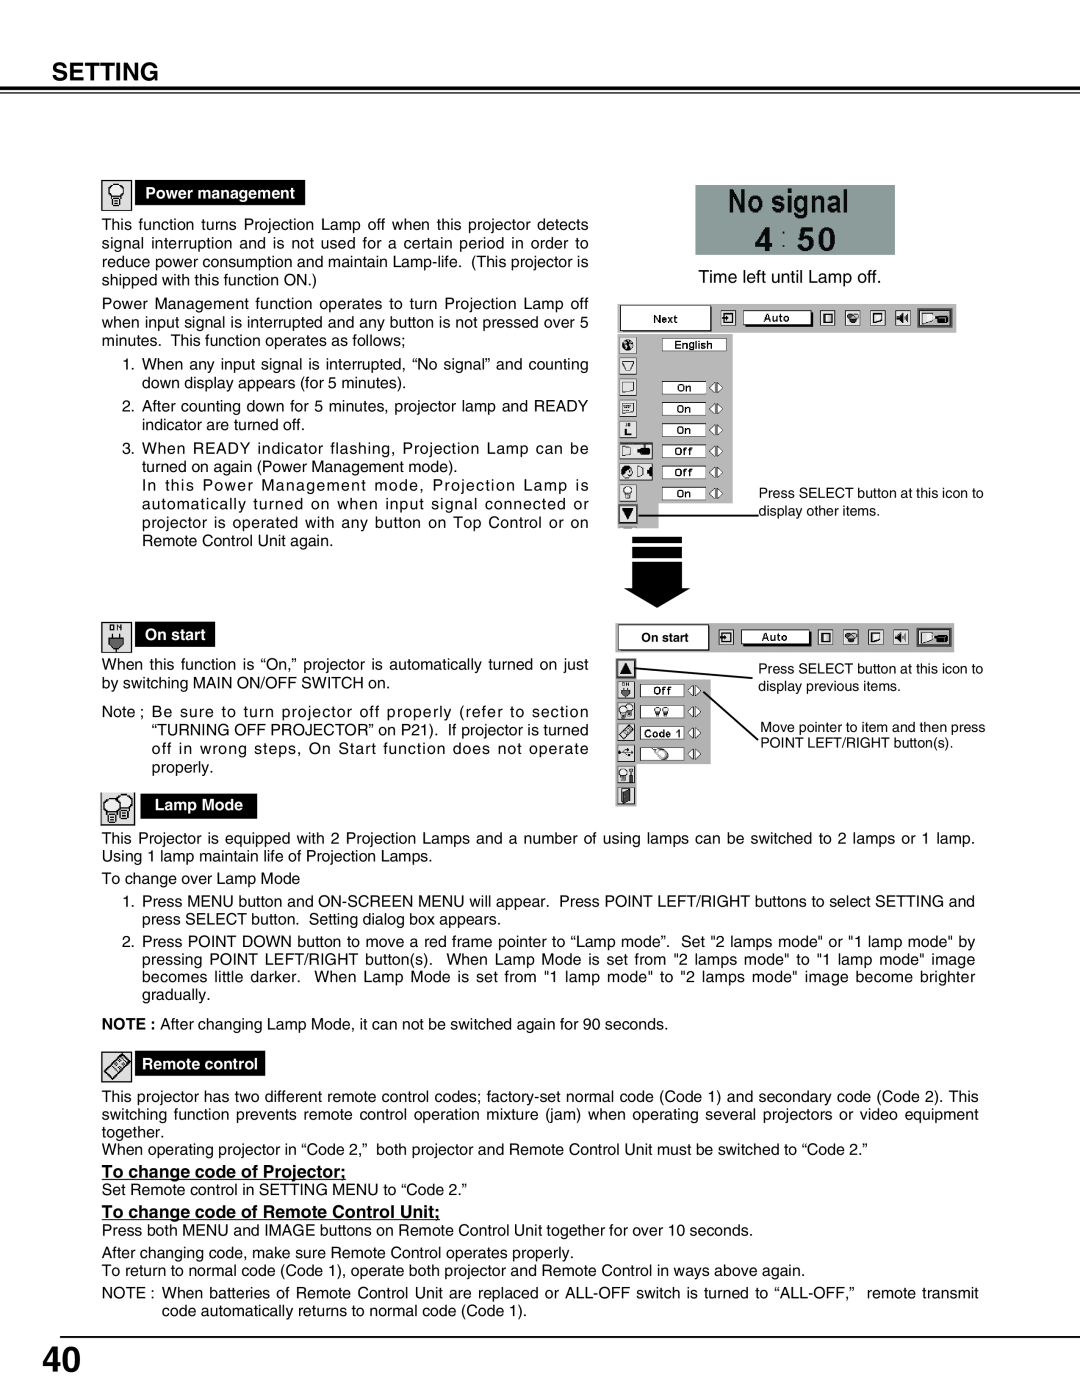 Christie Digital Systems 38-MX2001-01 user manual Setting, Time left until Lamp off, To change code of Projector 